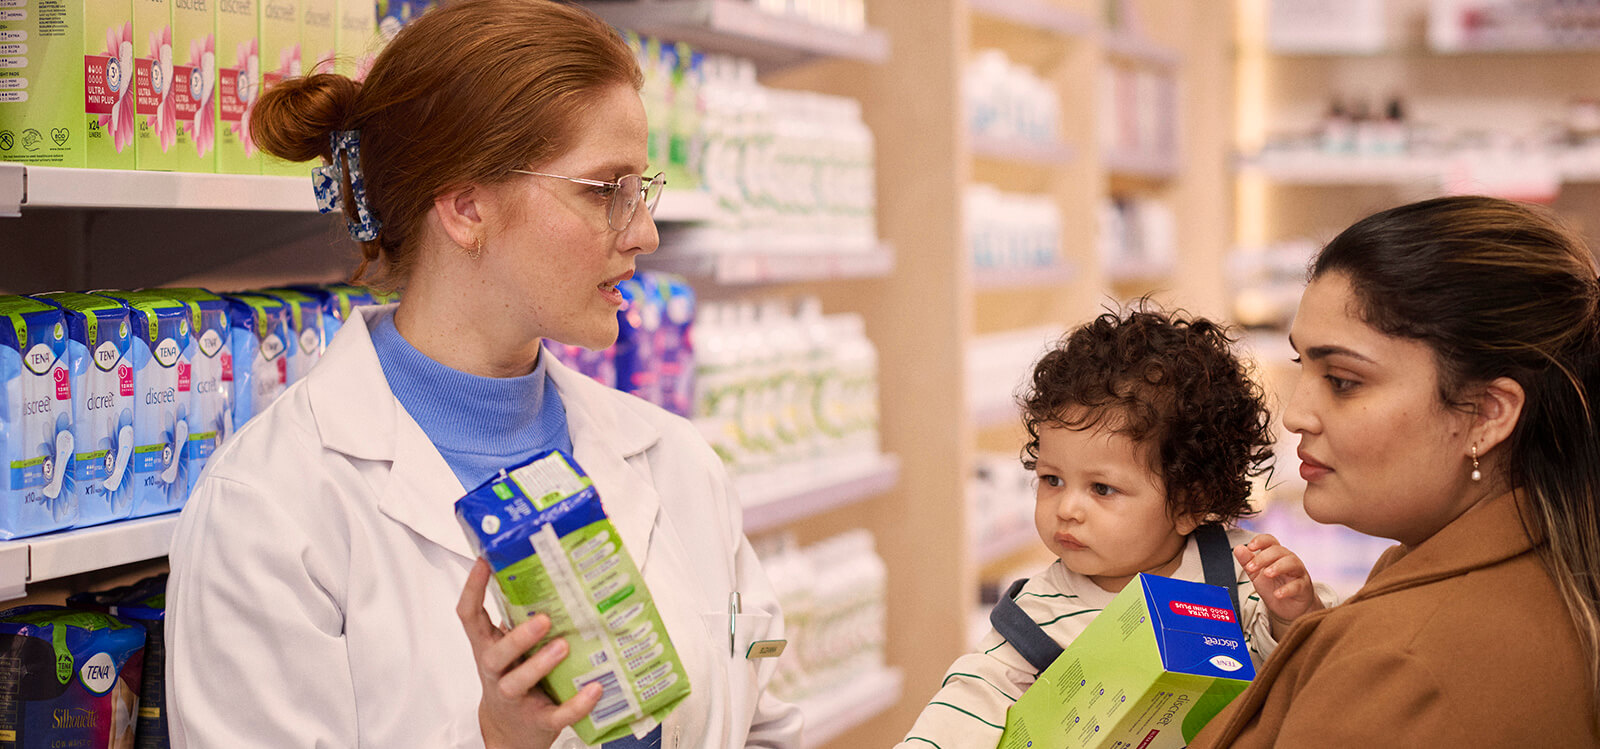 Pharmacist showing TENA product to Mother with small child